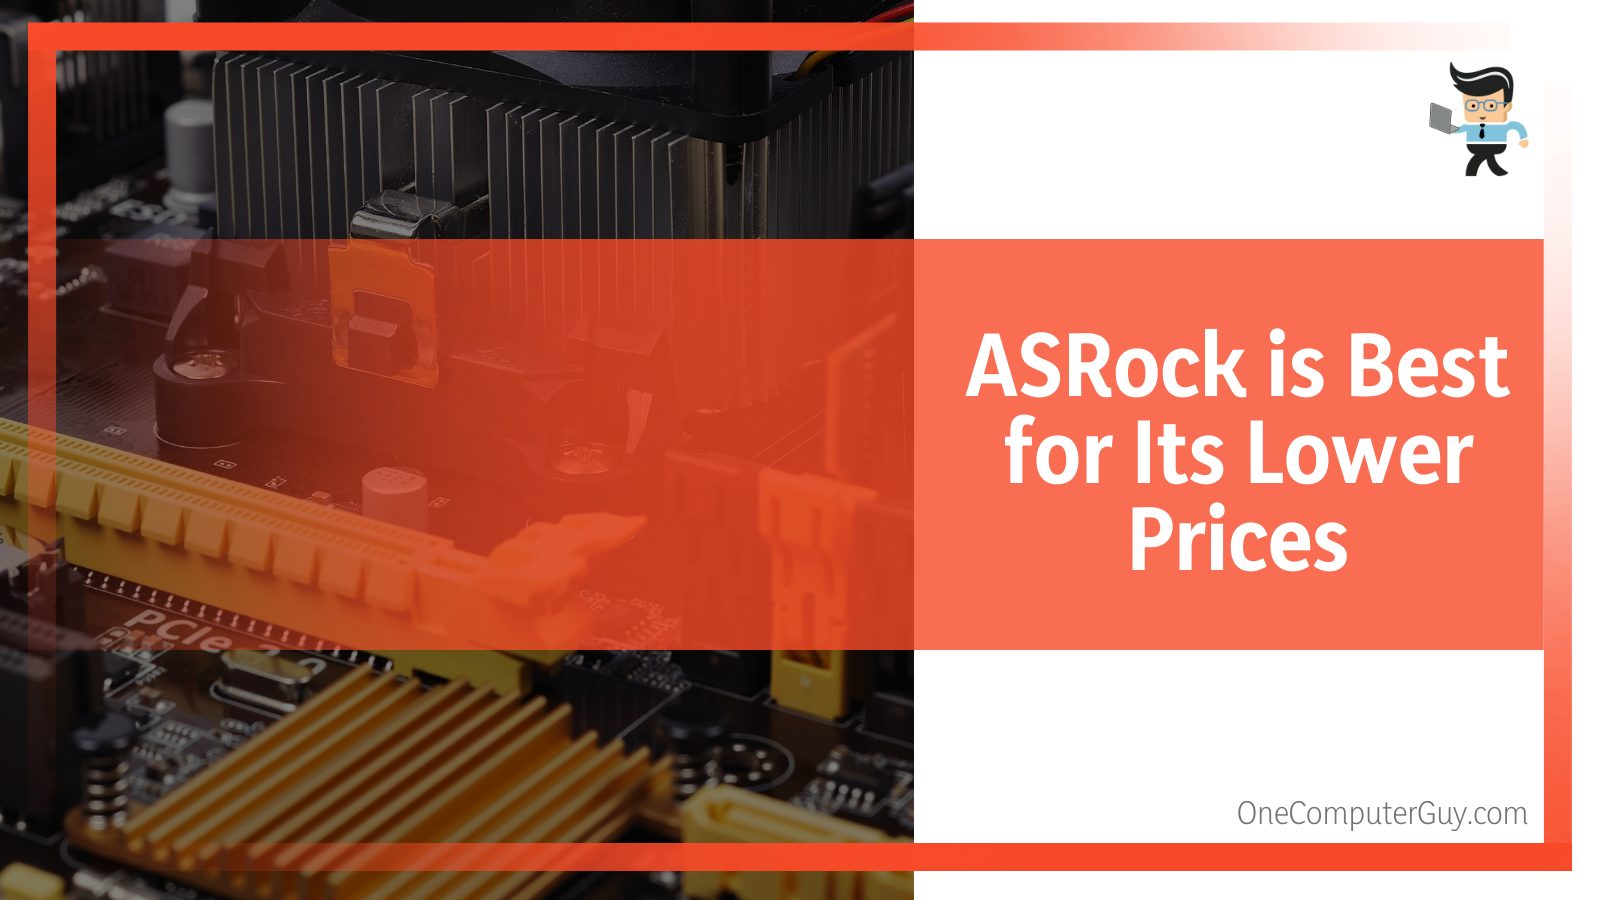 ASRock is best for its lower prices